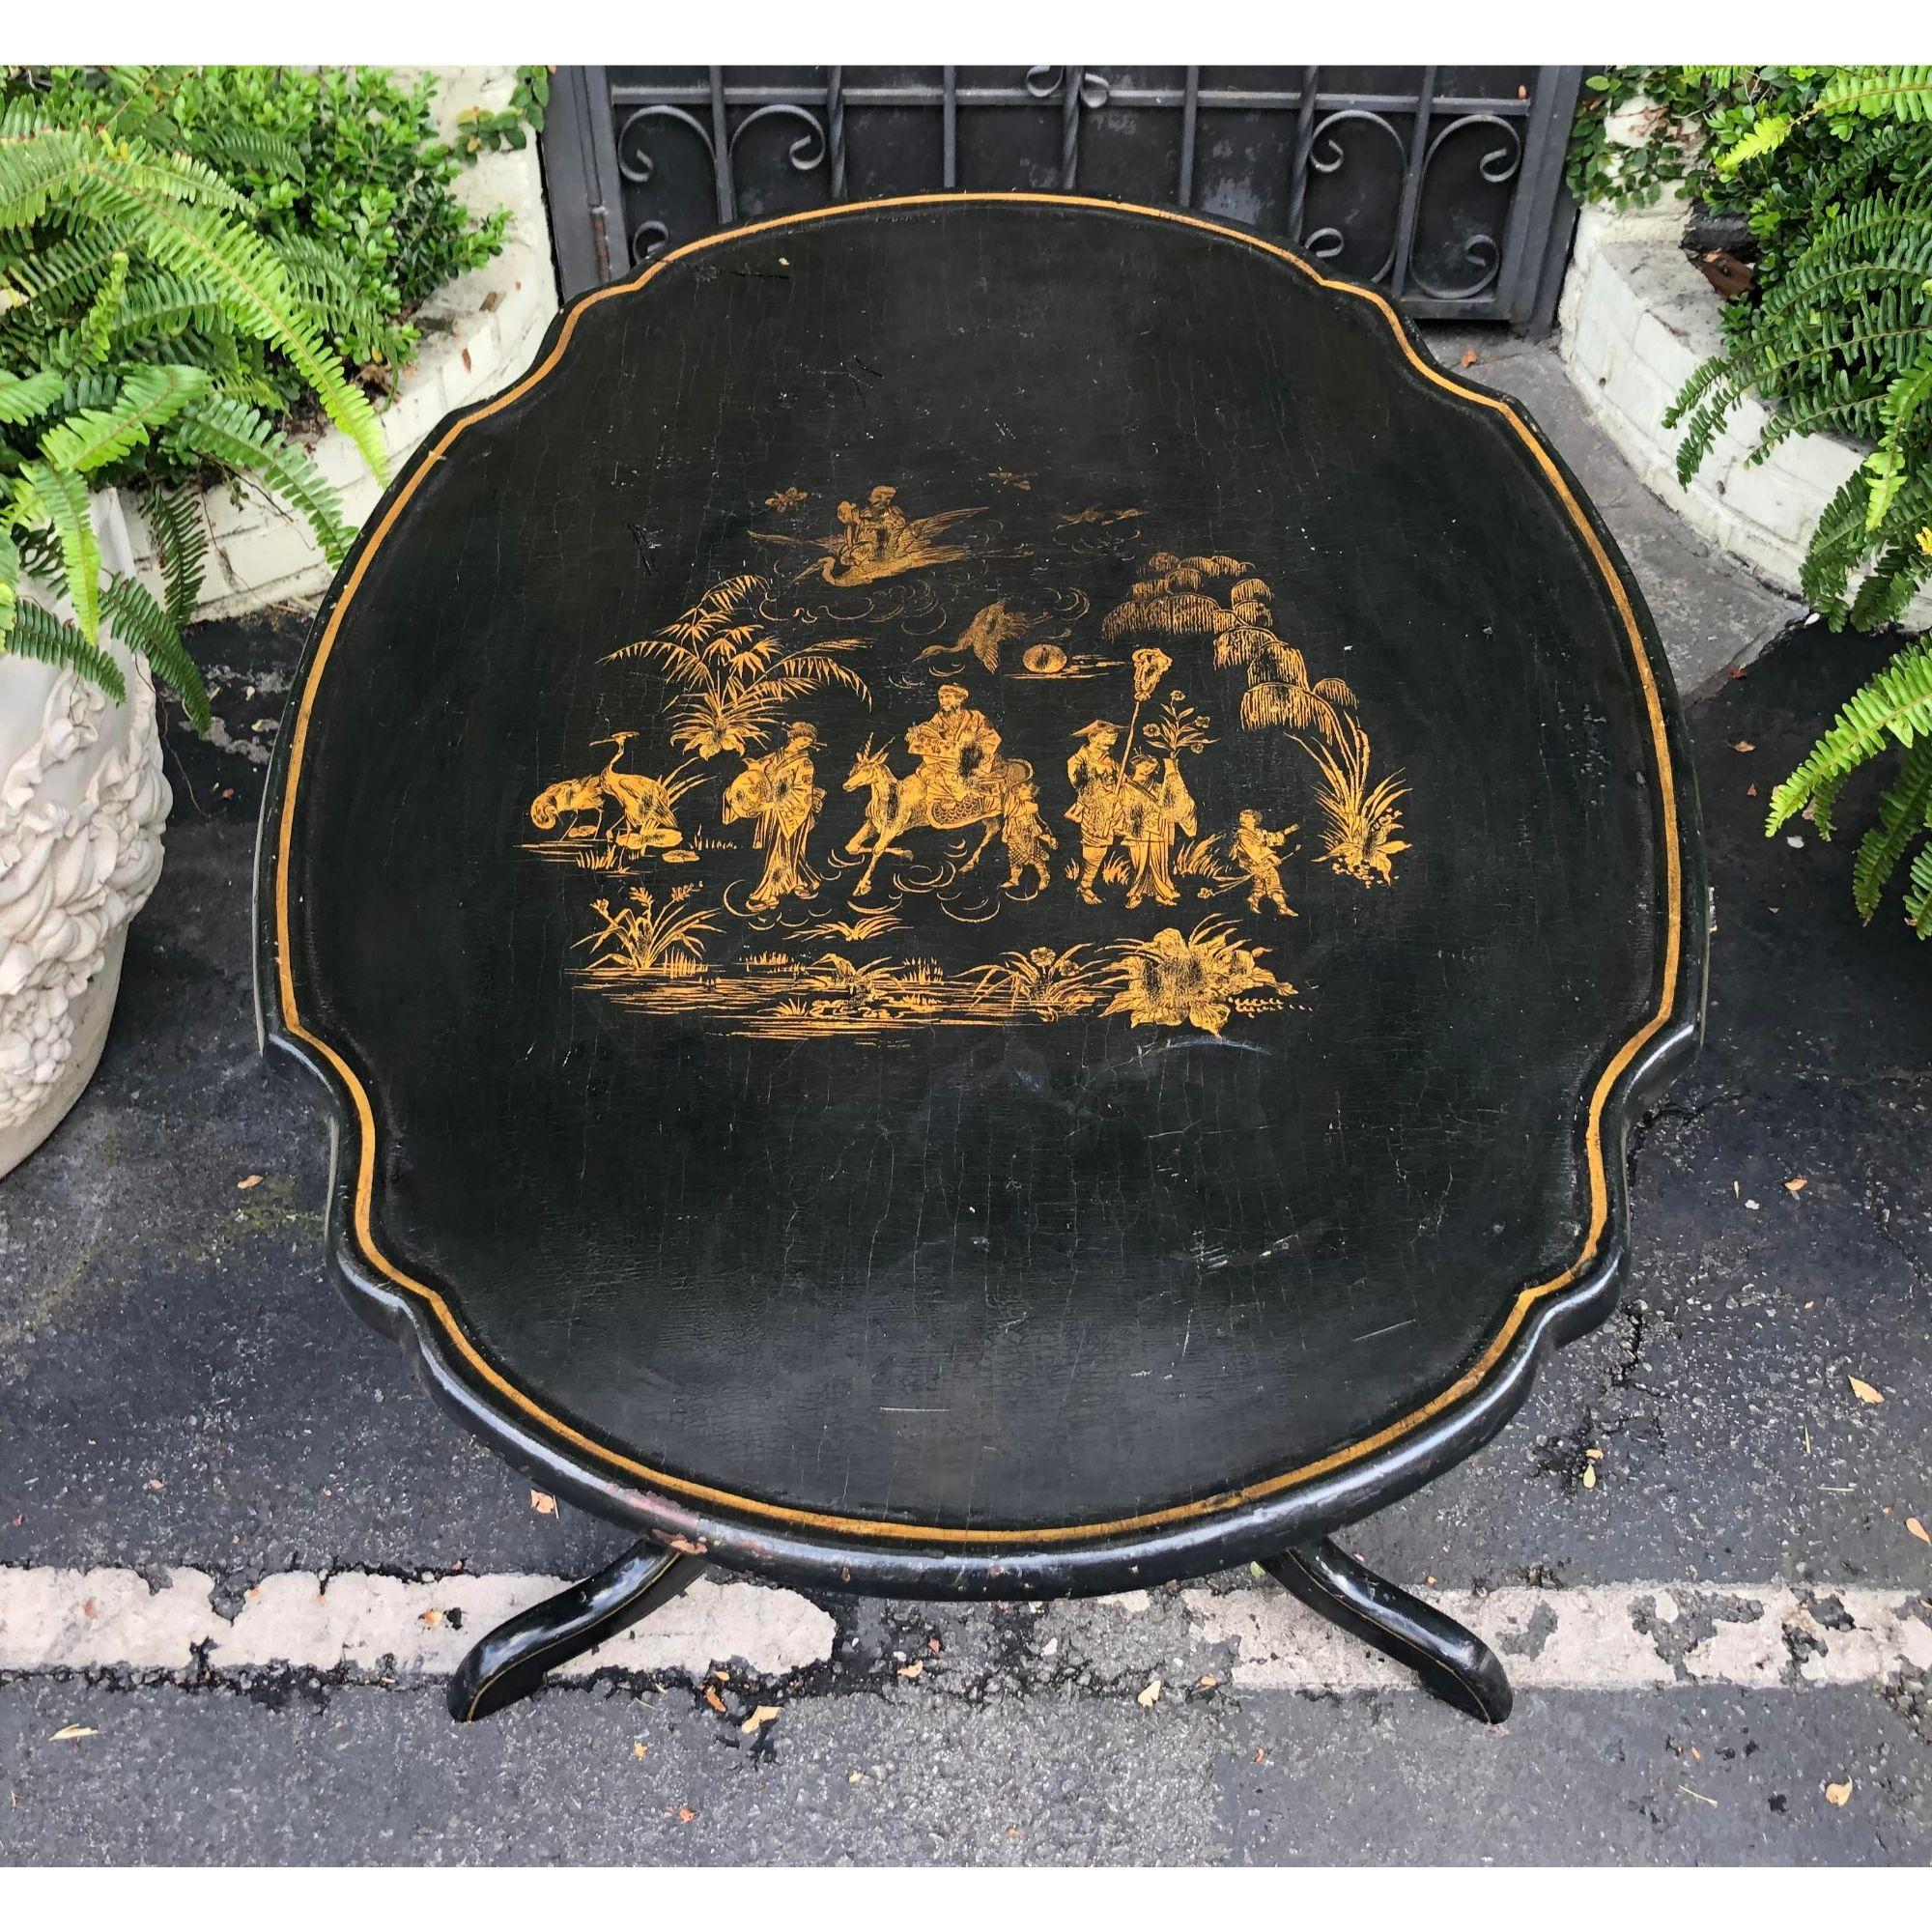 Wood Antique 18C Black & Gold Chinoiserie Decorated Tripod Tilt Top Table